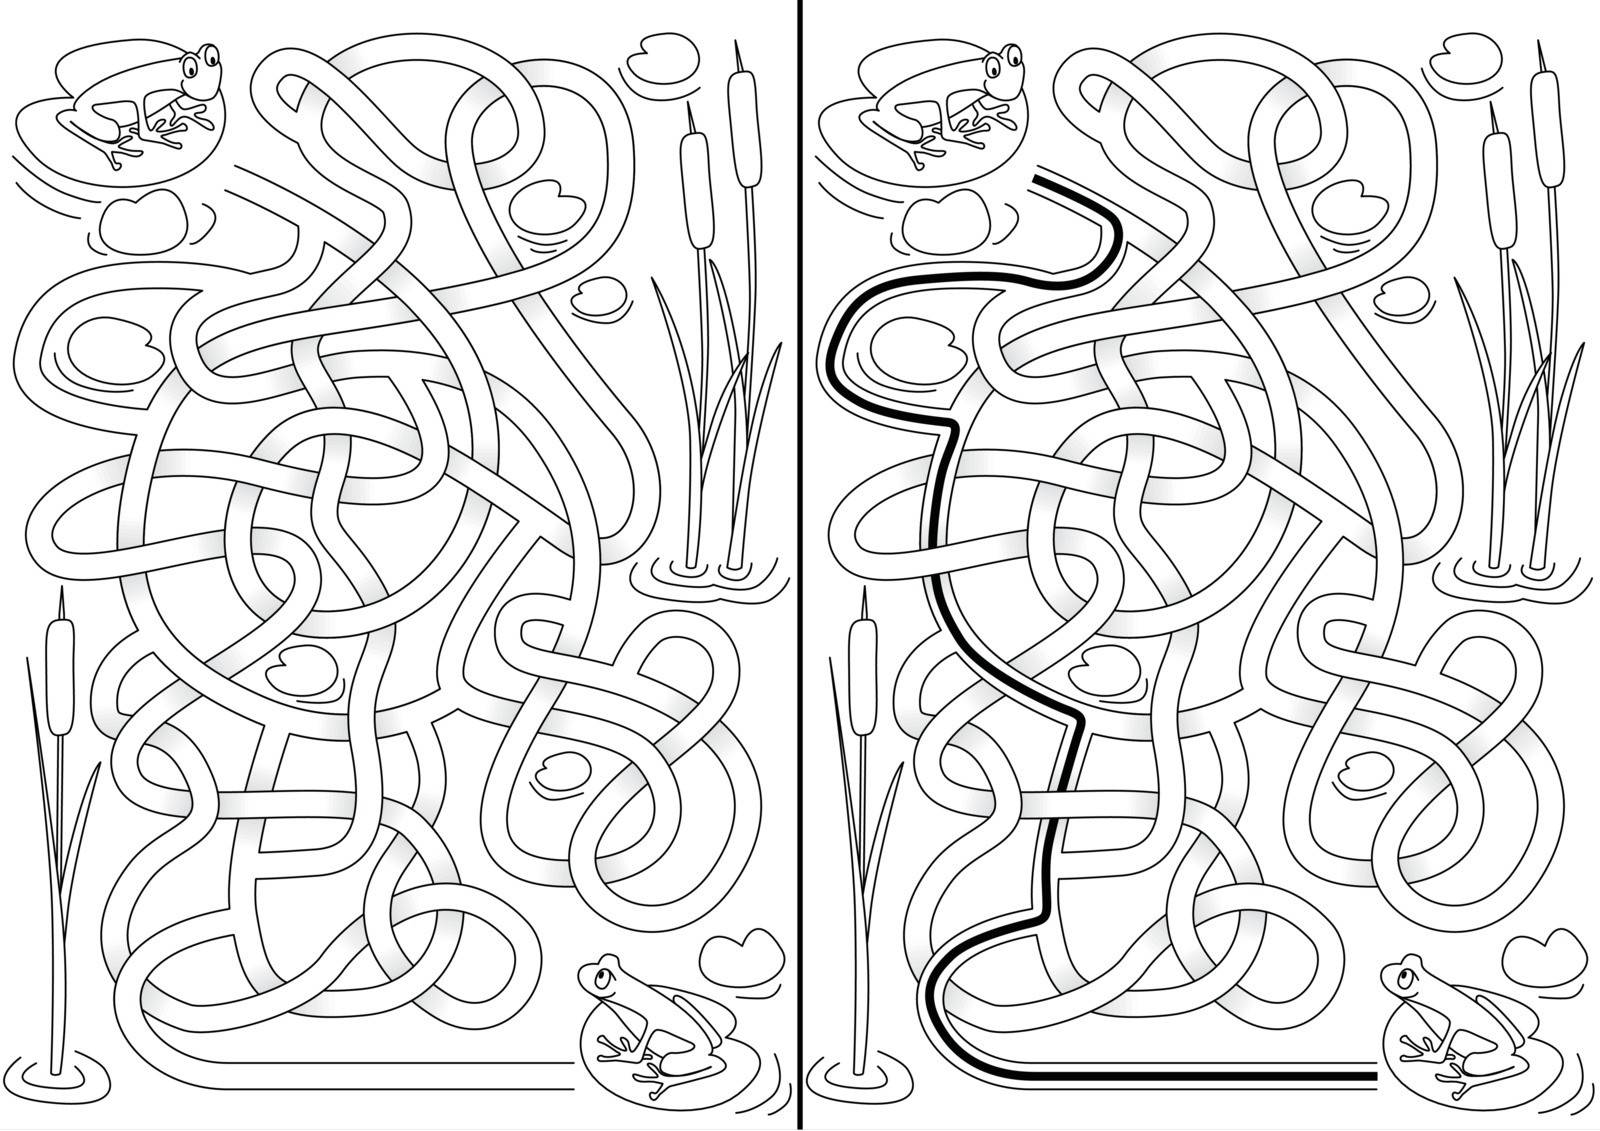 Frogs maze for kids with a solution in black and white